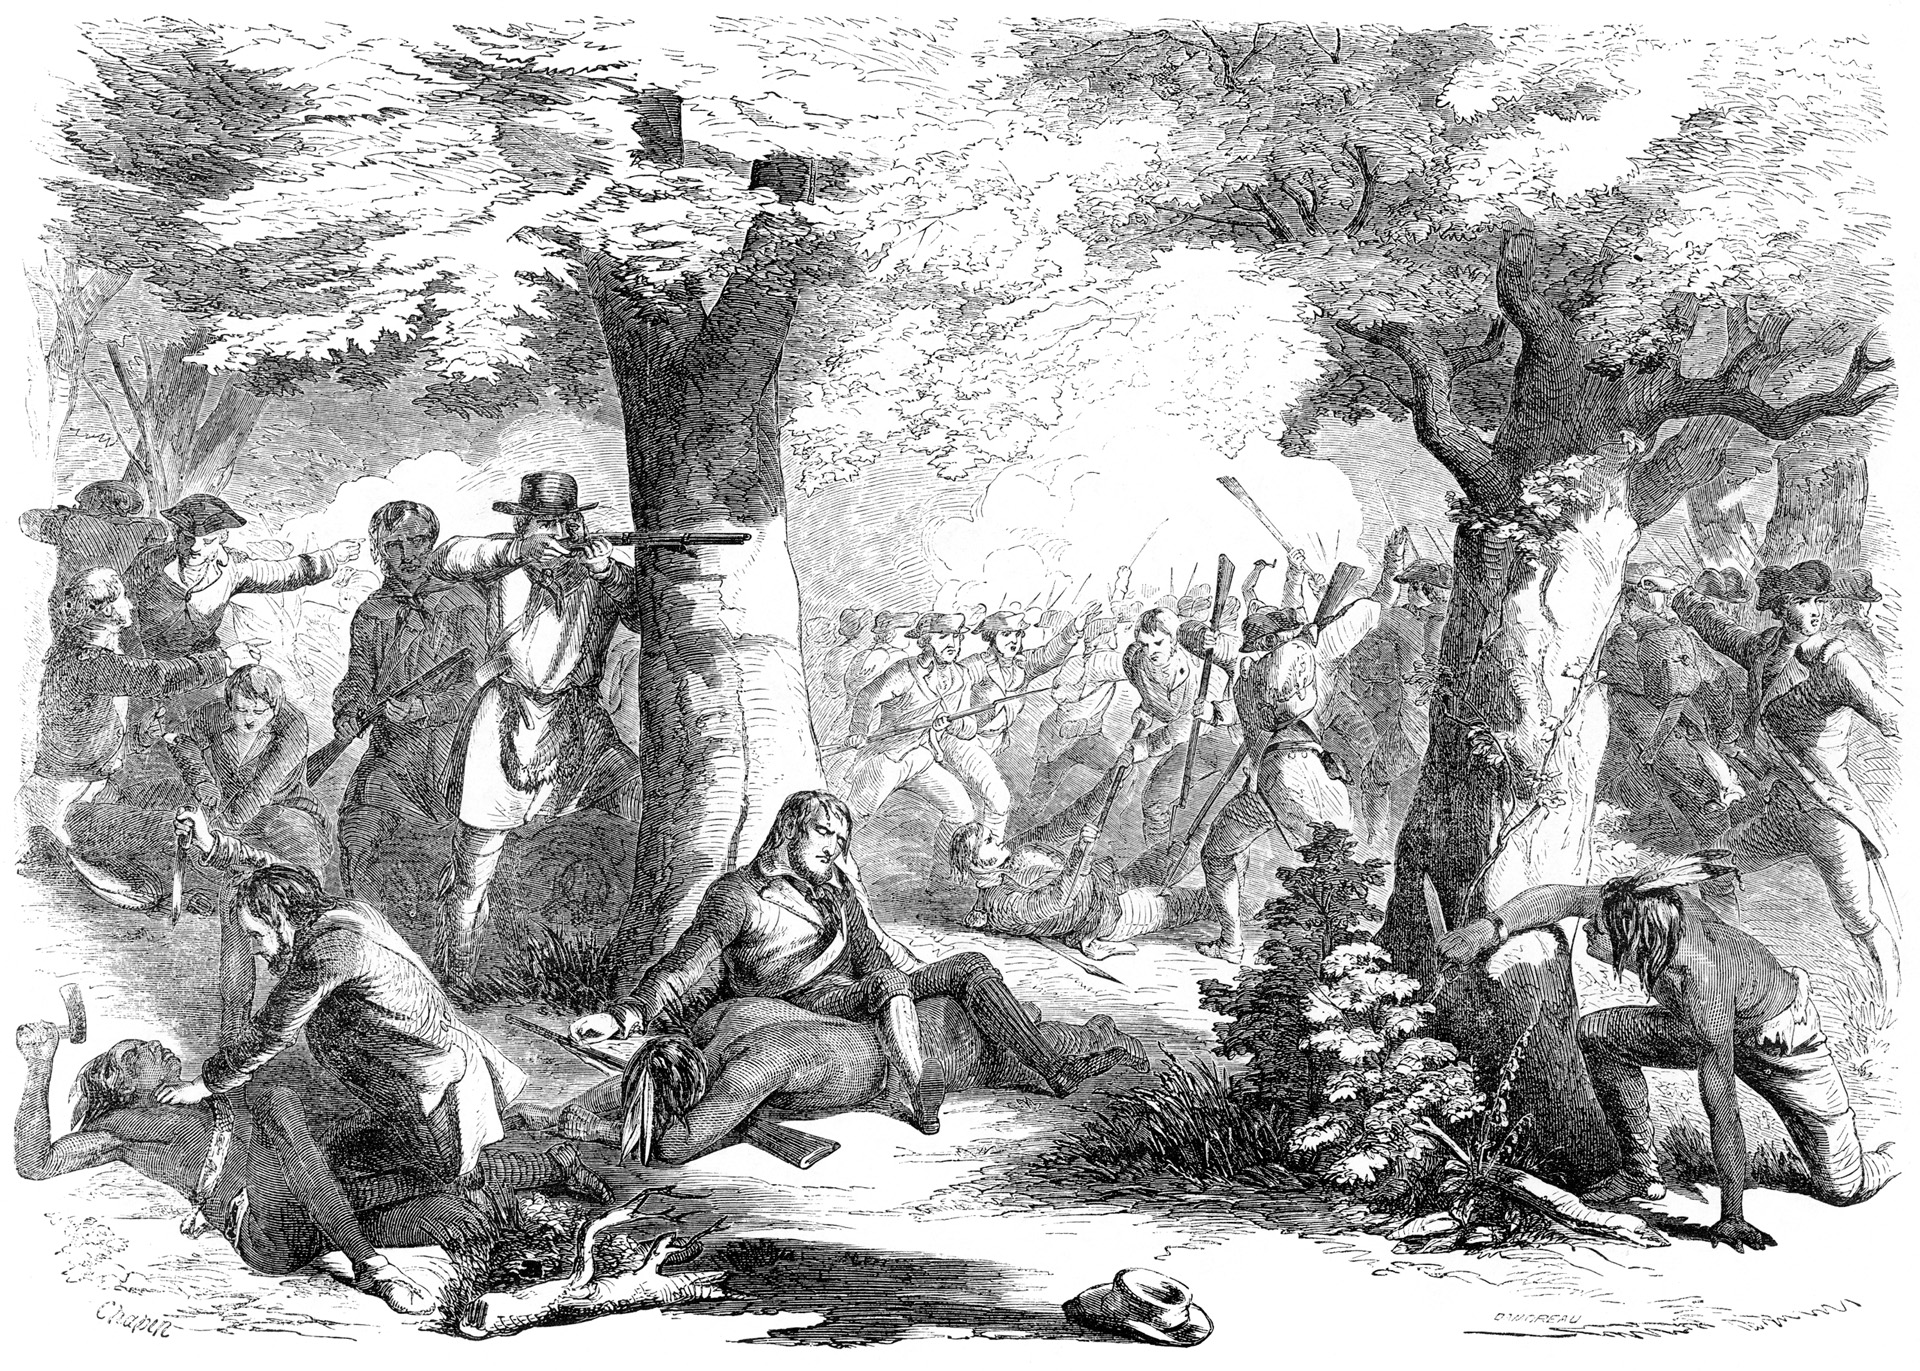 Herkimer, shown wounded in the center, directs his troops with the fighting very close and all around him. At times, neighbors fought neighbors in a conflict neither side wanted to quit.